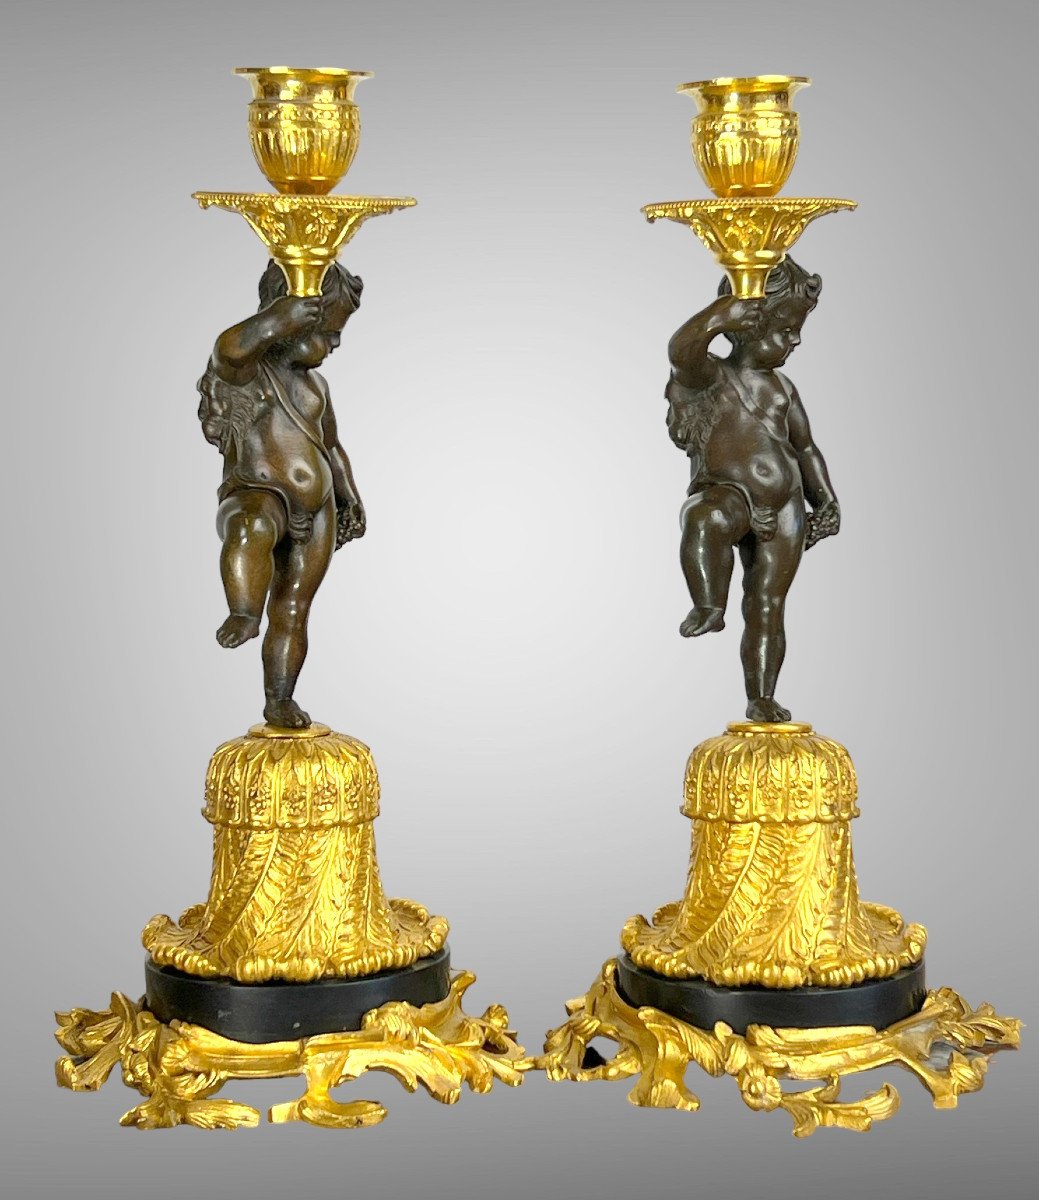 Pair Of Bronze Candelabras With Brown And Golden Patina With Cherb Decor From The 19th C.-photo-3